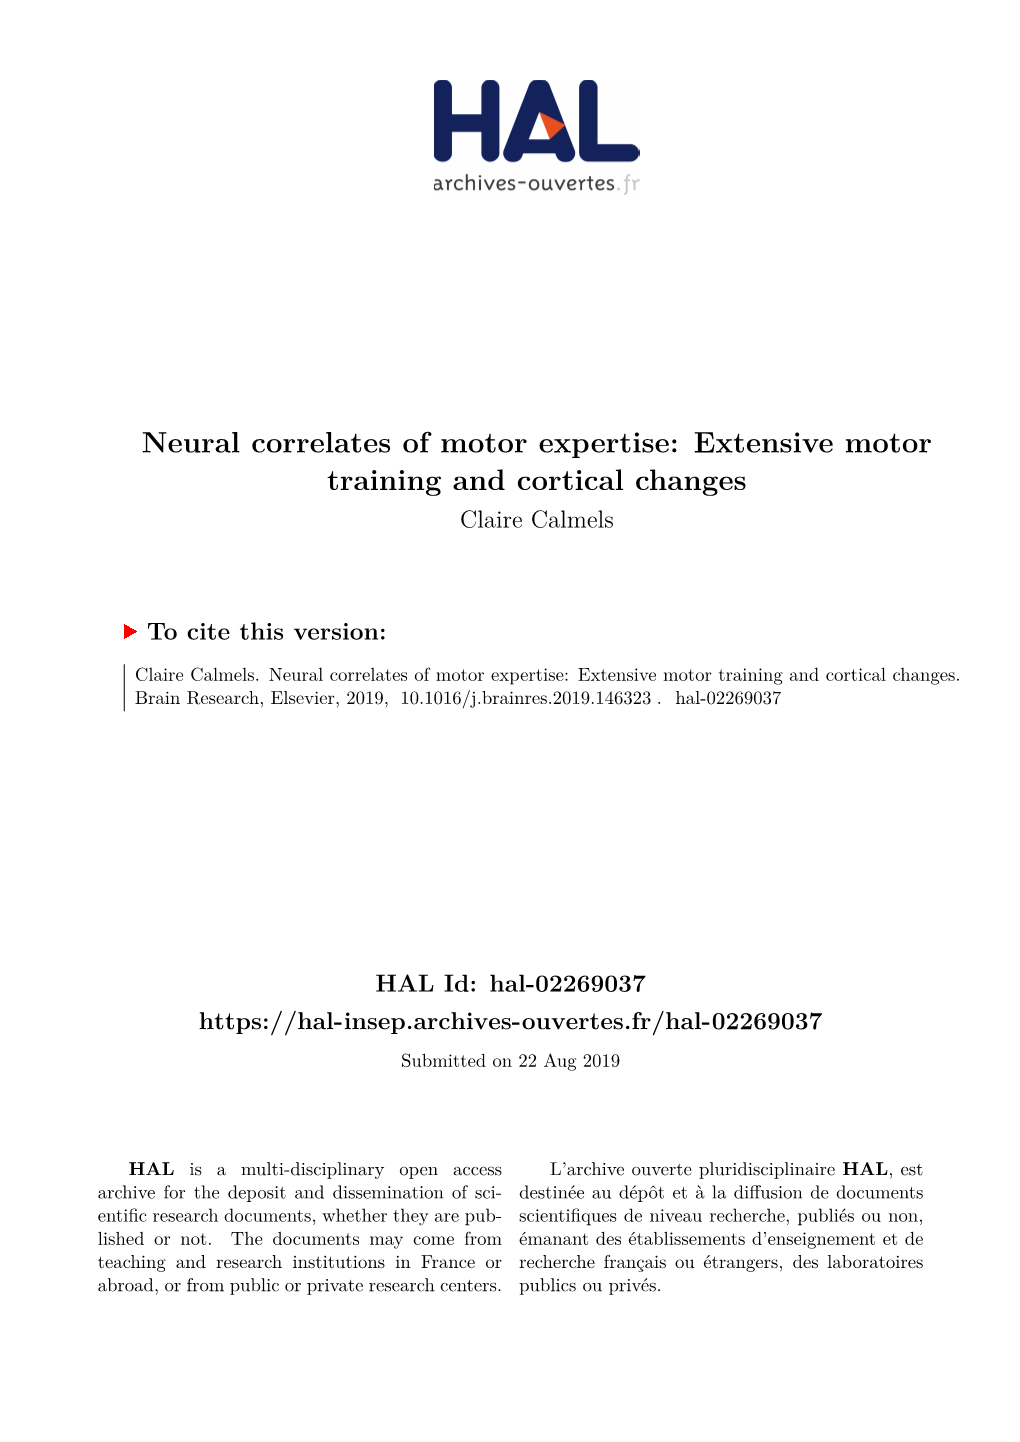 Neural Correlates of Motor Expertise: Extensive Motor Training and Cortical Changes Claire Calmels